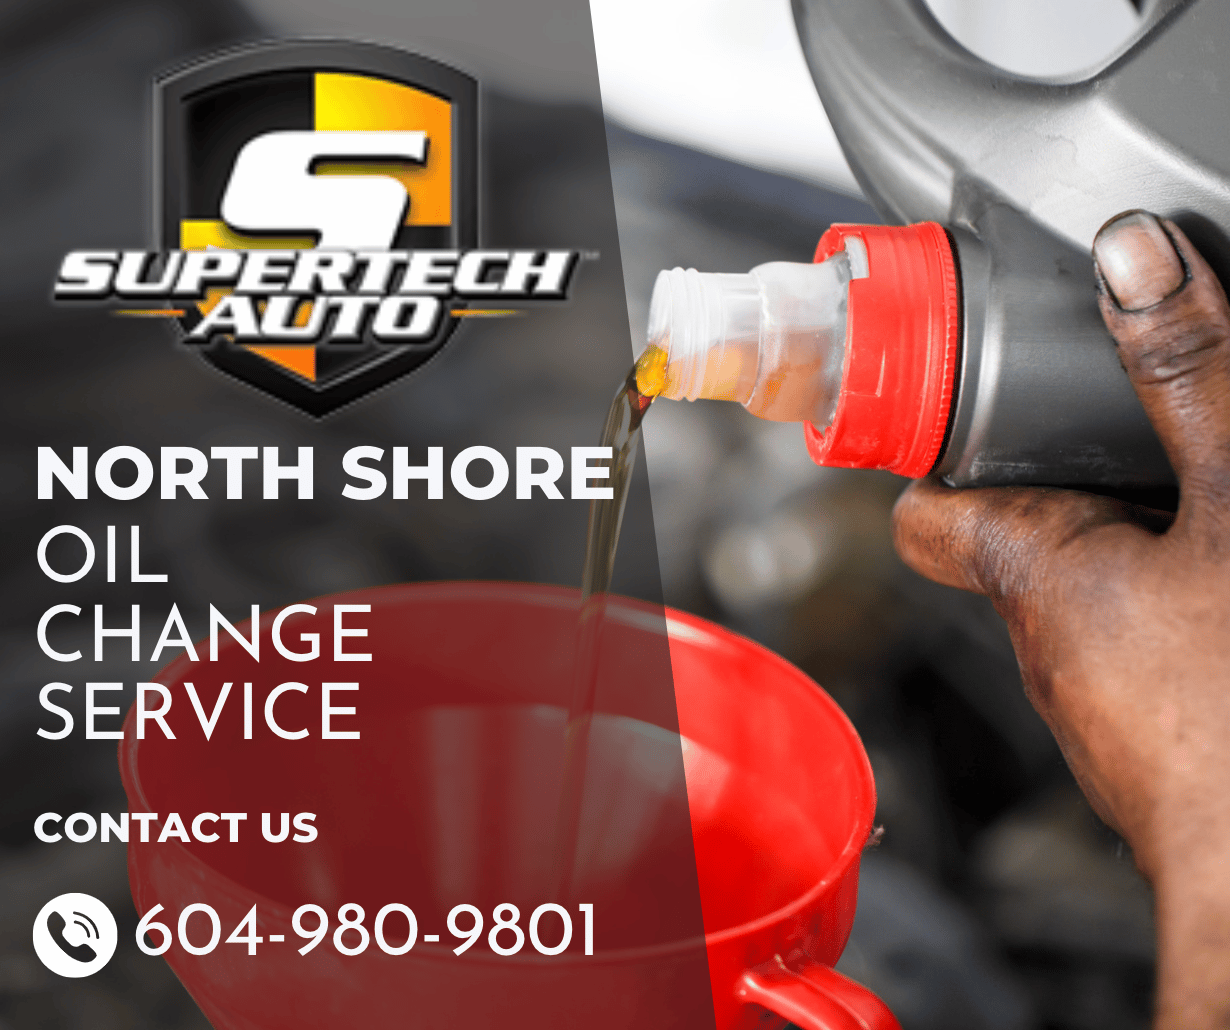 North Shore Oil Change Service: Top Auto Maintenance Tips for Fall